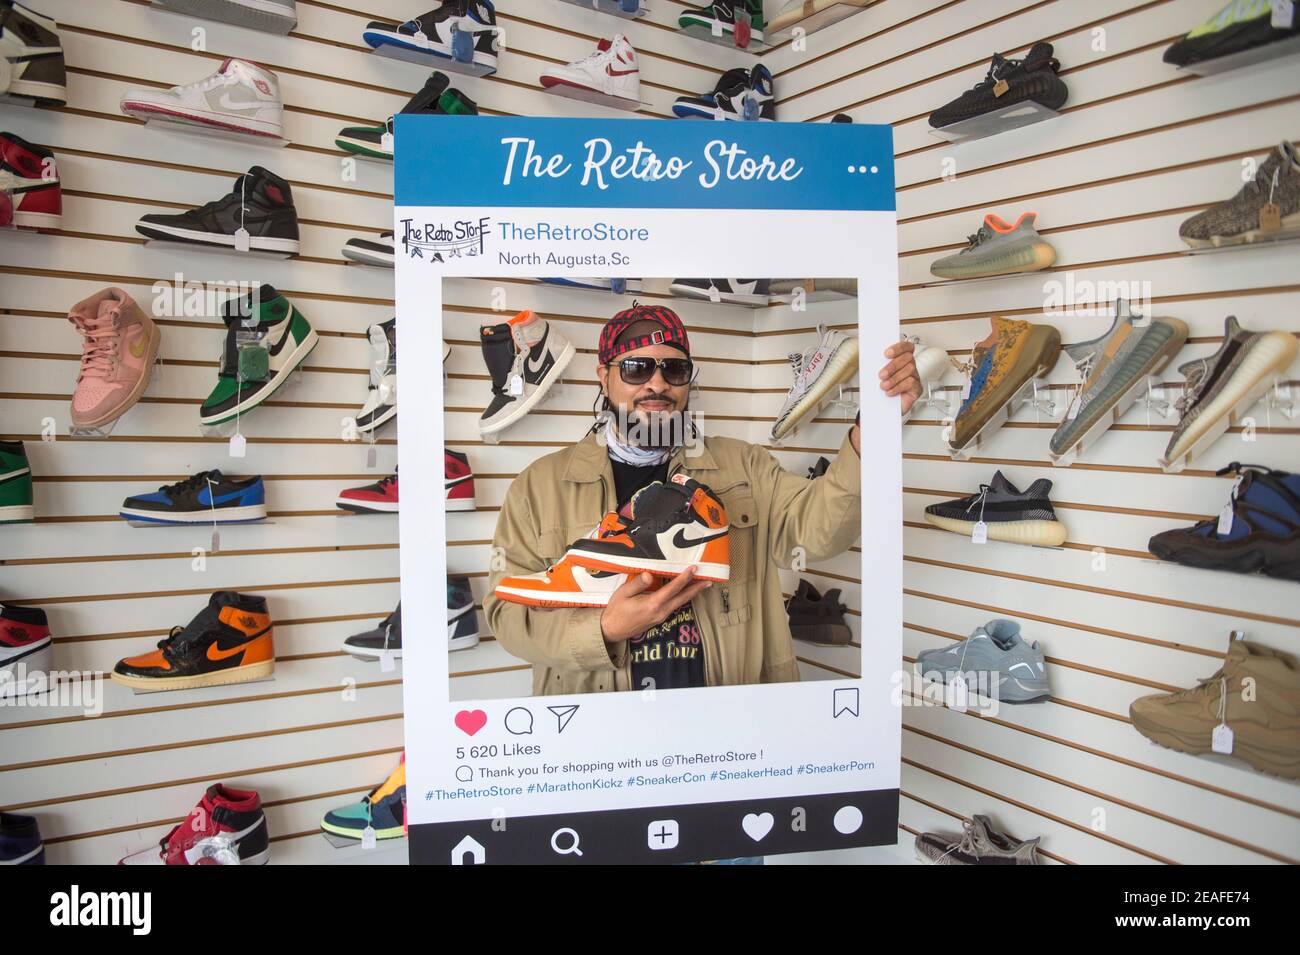 The Retro Store 803 owner Maurice Tolliver holds some collectible Nike Air  Jordan shoes at The Retro Store 803 in North Augusta, SC., Thursday morning  February 4, 2021. Gaaug 020521 Newshoestore1 Mh (